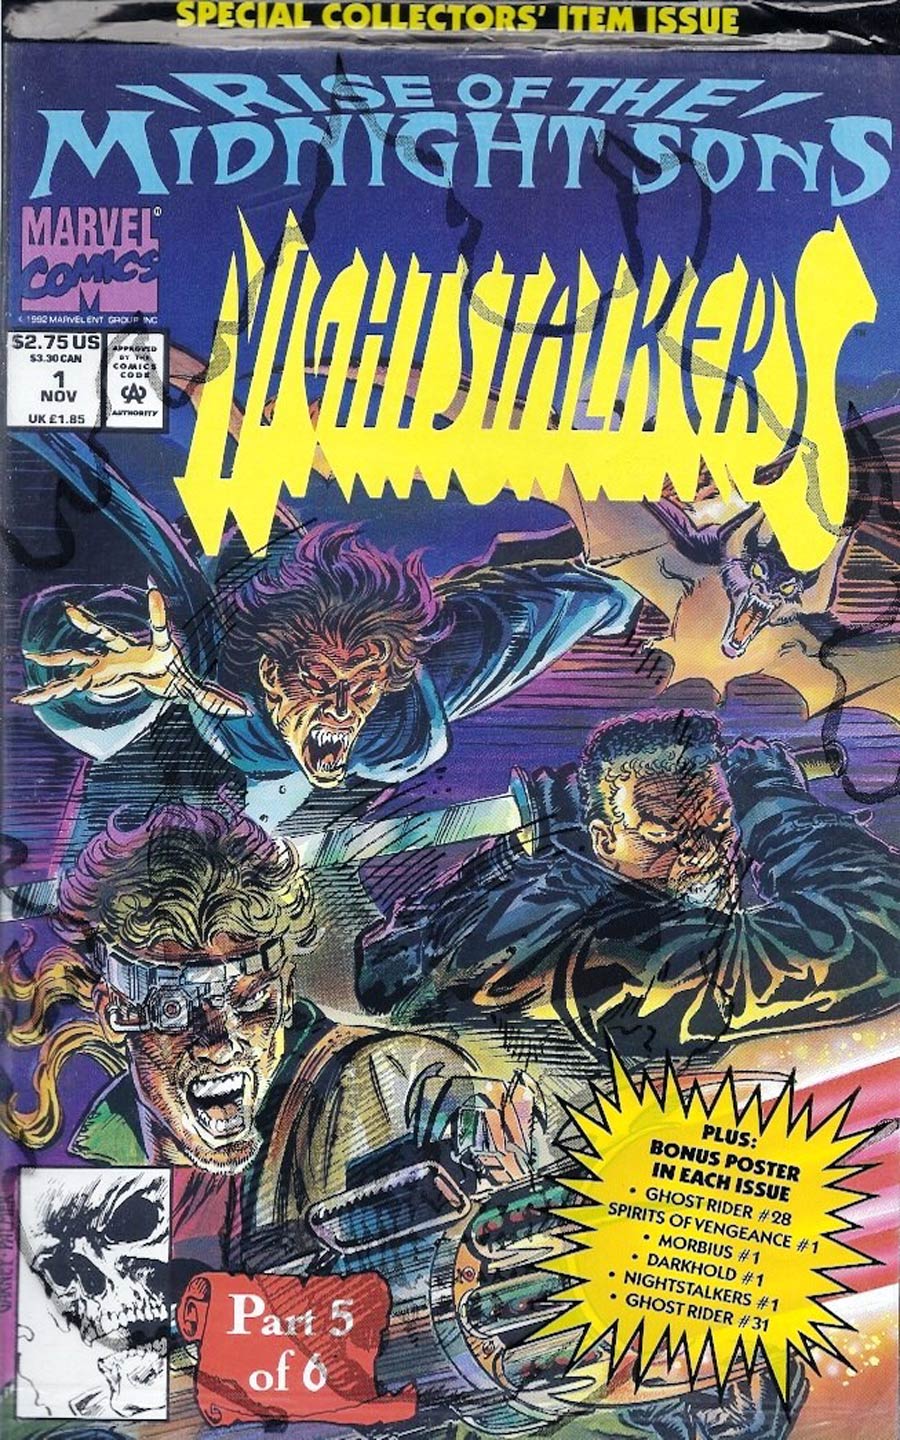 Nightstalkers #1 With Polybag